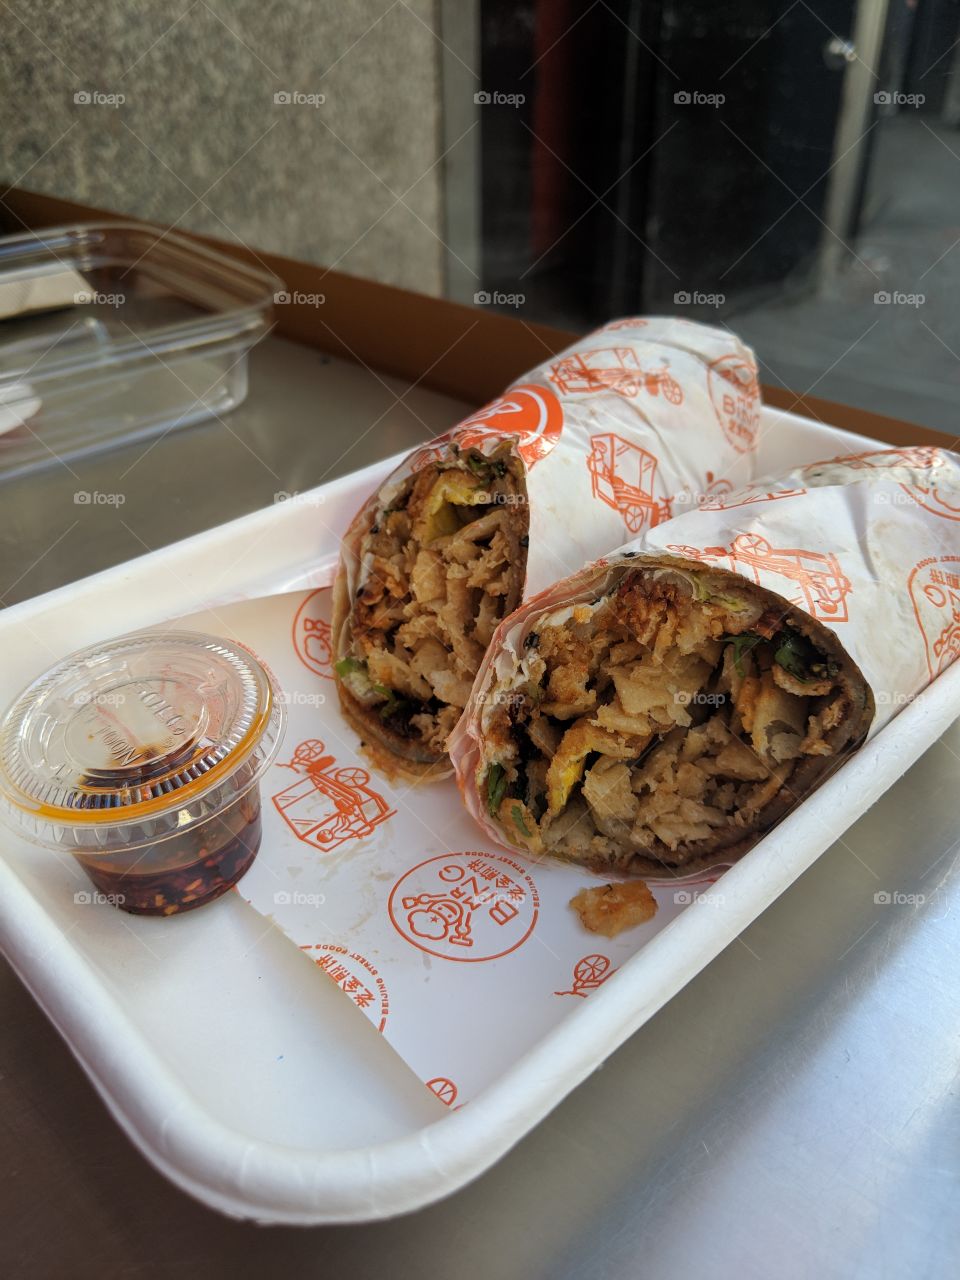 Mr. bing burrito in NYC, Chinese Crunchy wrap with duck and spices